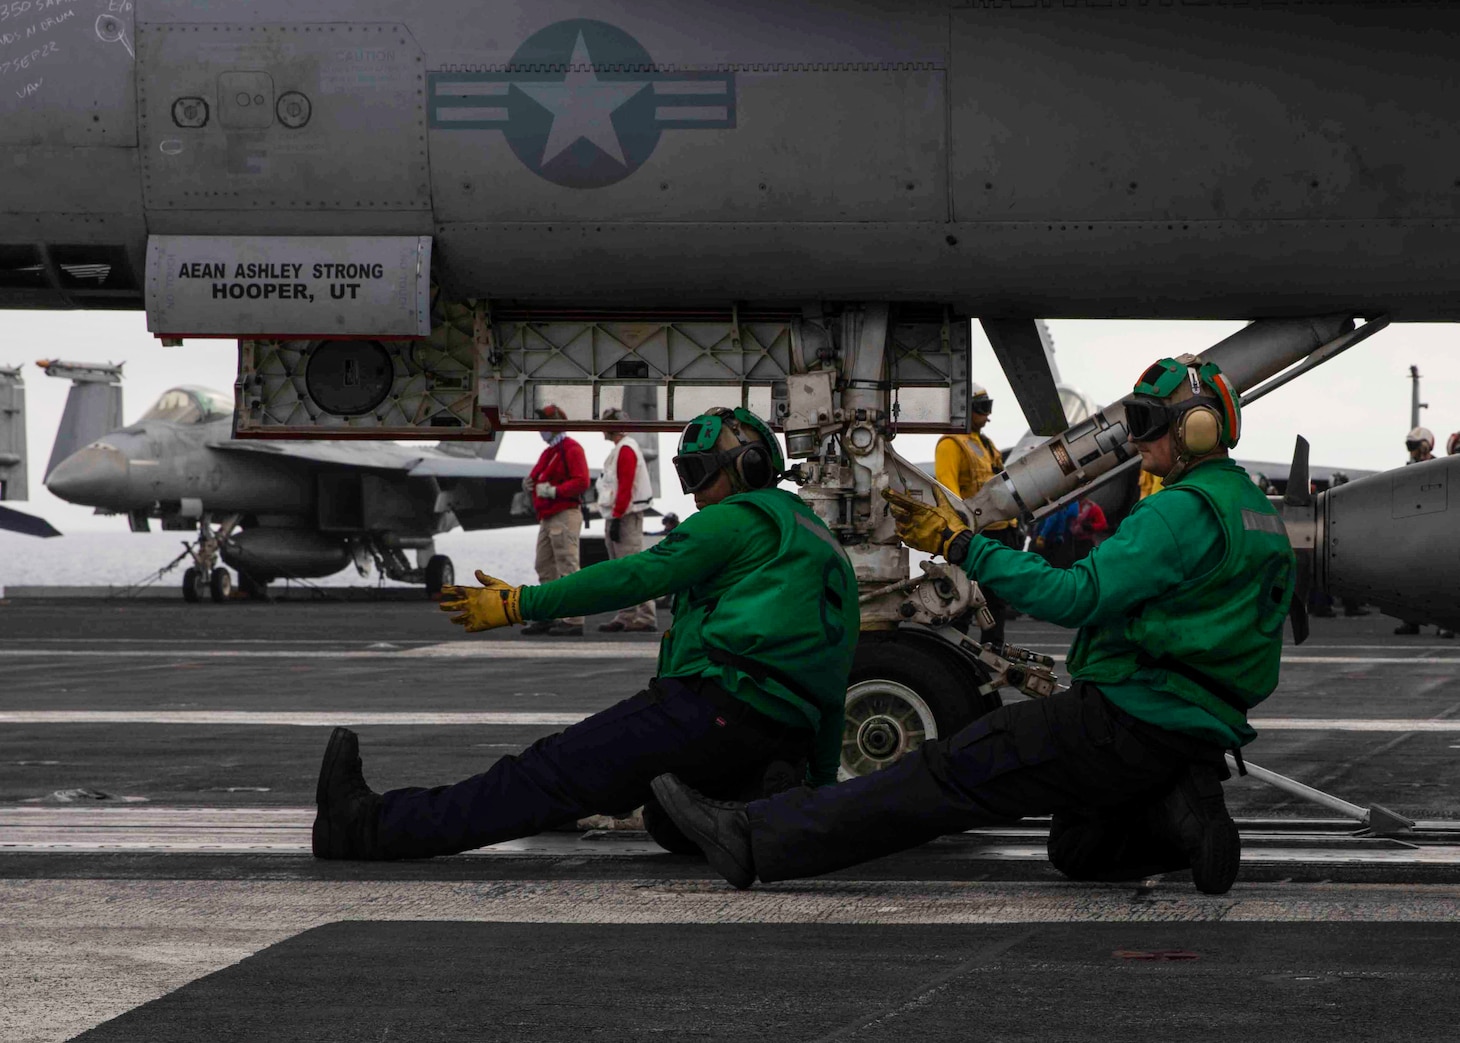 Sailors signal an F/A-18E Super Hornet aircraft, attached to Strike Fighter Squadron (VFA) 136, aboard the Nimitz-class aircraft carrier USS George H.W. Bush (CVN 77), Sep. 9, 2022. Carrier Air Wing (CVW) 7 is the offensive air and strike component of Carrier Strike Group (CSG) 10 and the George H.W. Bush Carrier Strike Group (GHWBCSG). The squadrons of CVW-7 are,  VFA-86, VFA-103, VFA-136, VFA-143 Electronic Attack Squadron (VAQ) 140, Carrier Airborne Early Warning Squadron (VAW) 121, Helicopter Sea Combat Squadron (HSC) 5 and Helicopter Maritime Strike Squadron (HSM) 46. The GHWBCSG is on a scheduled deployment in the U.S. Naval Forces Europe area of operations, employed by U.S. Sixth Fleet to defend U.S., allied, and partner interests.